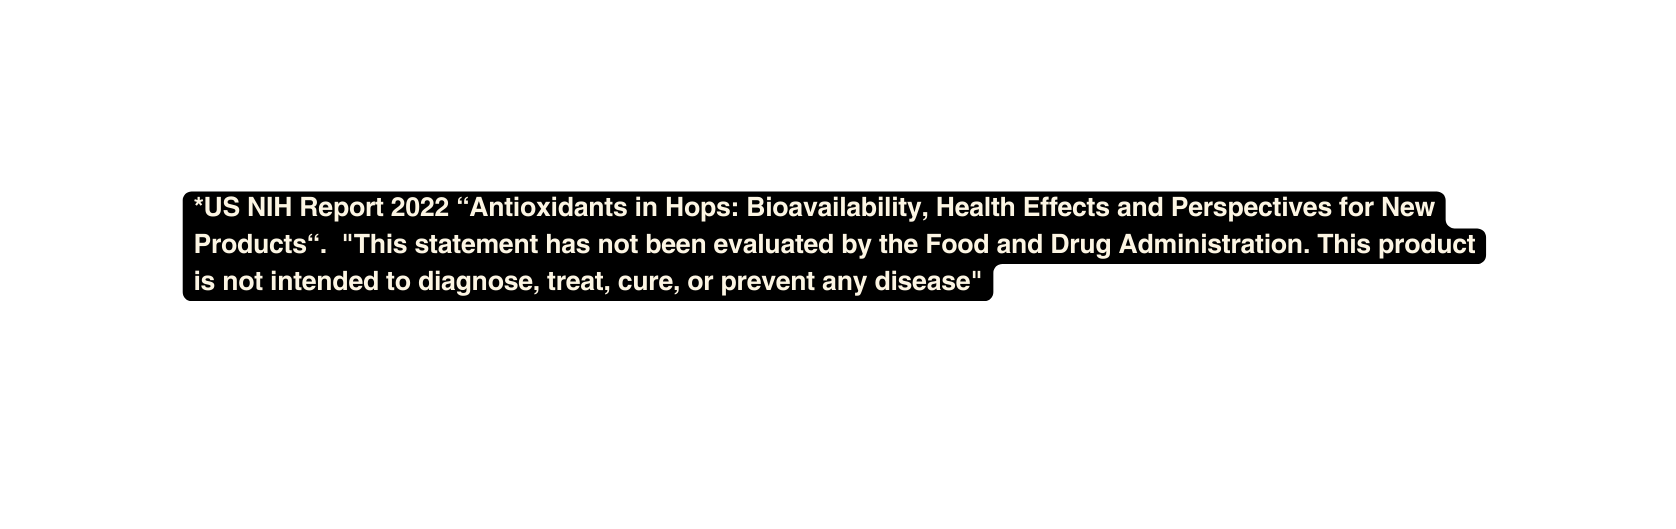 US NIH Report 2022 Antioxidants in Hops Bioavailability Health Effects and Perspectives for New Products This statement has not been evaluated by the Food and Drug Administration This product is not intended to diagnose treat cure or prevent any disease